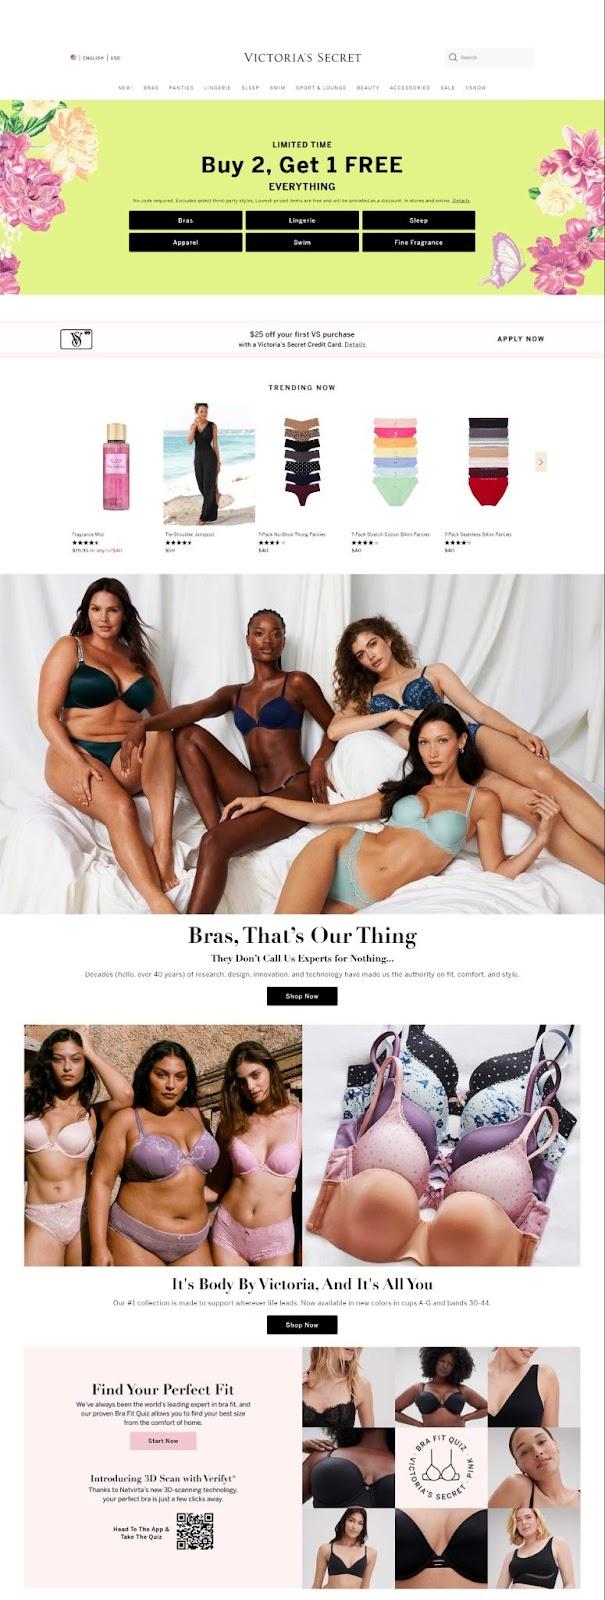 Screen capture of Victoria's Secret homepage demonstrating how pink is used as an accent color across the site.